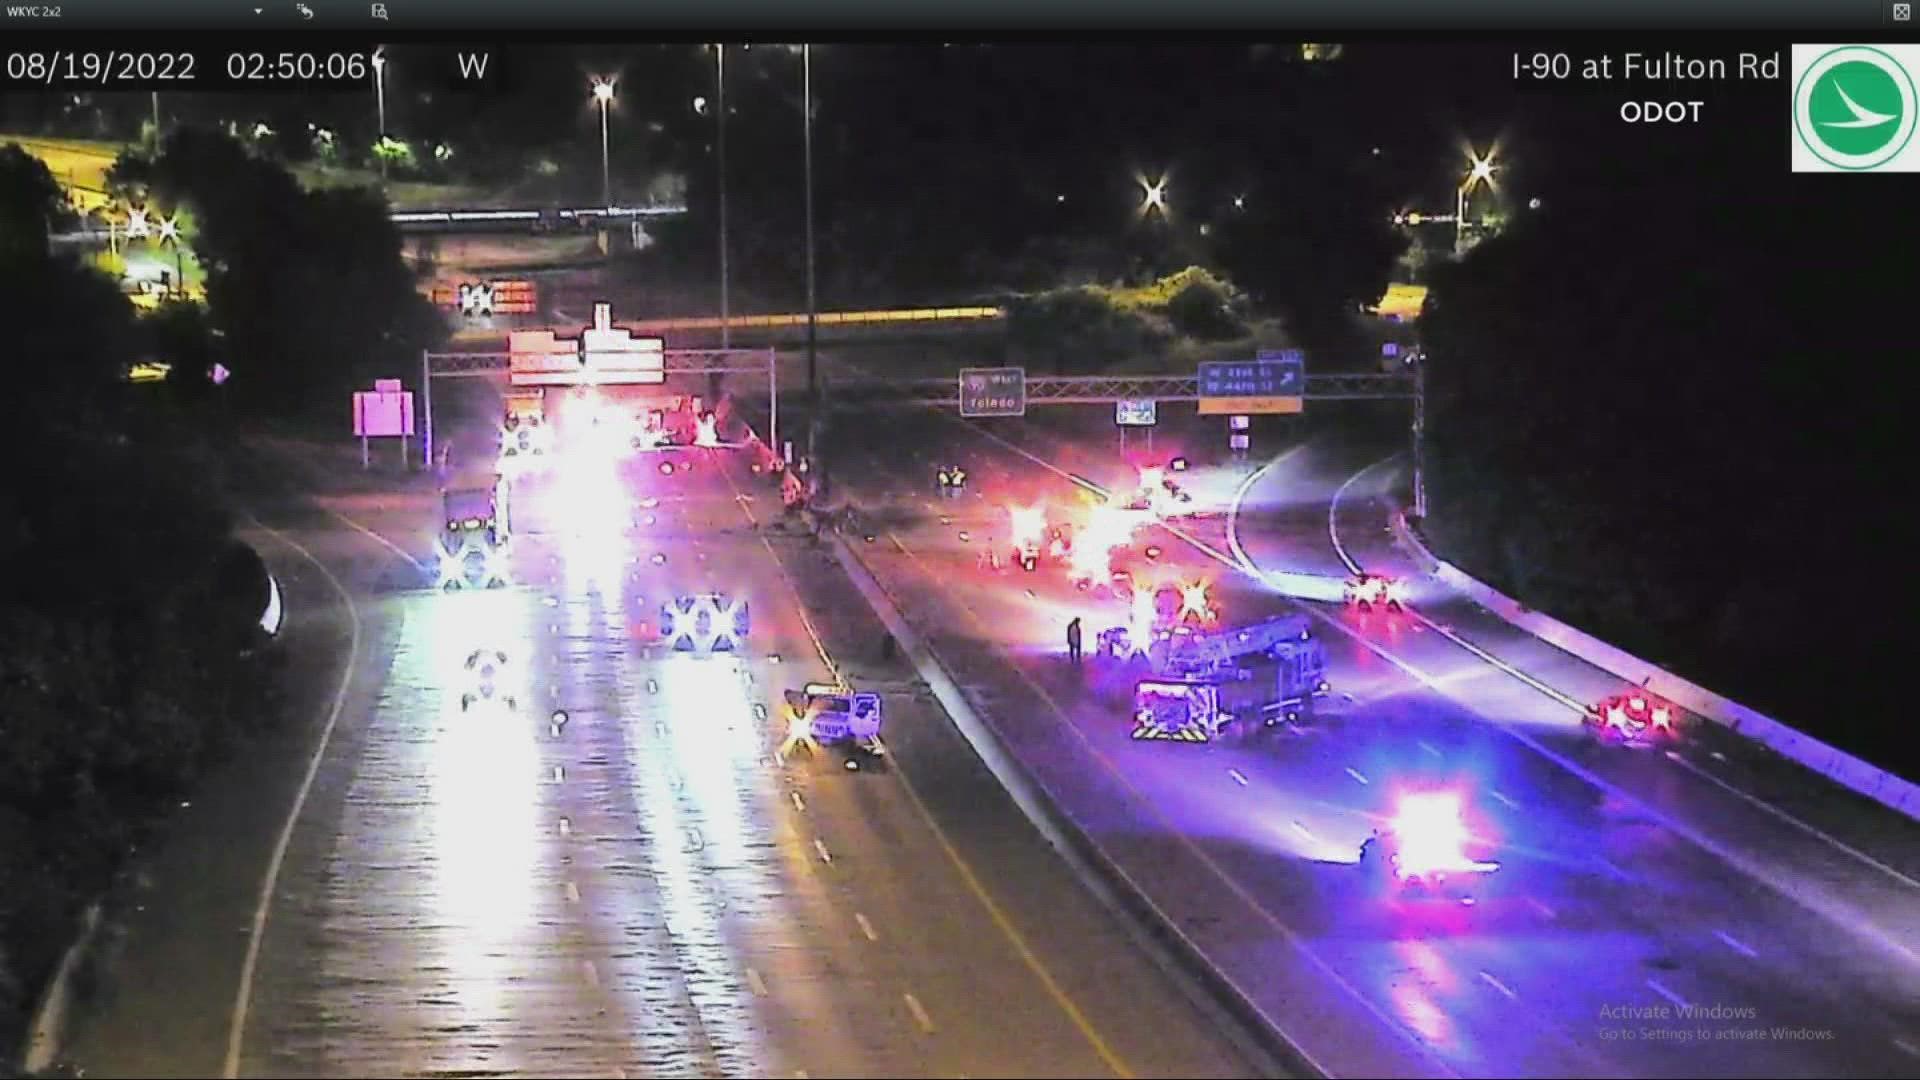 Cleveland EMS says a 37-year-old man died in the crash on I-90 West at West 44th Street.